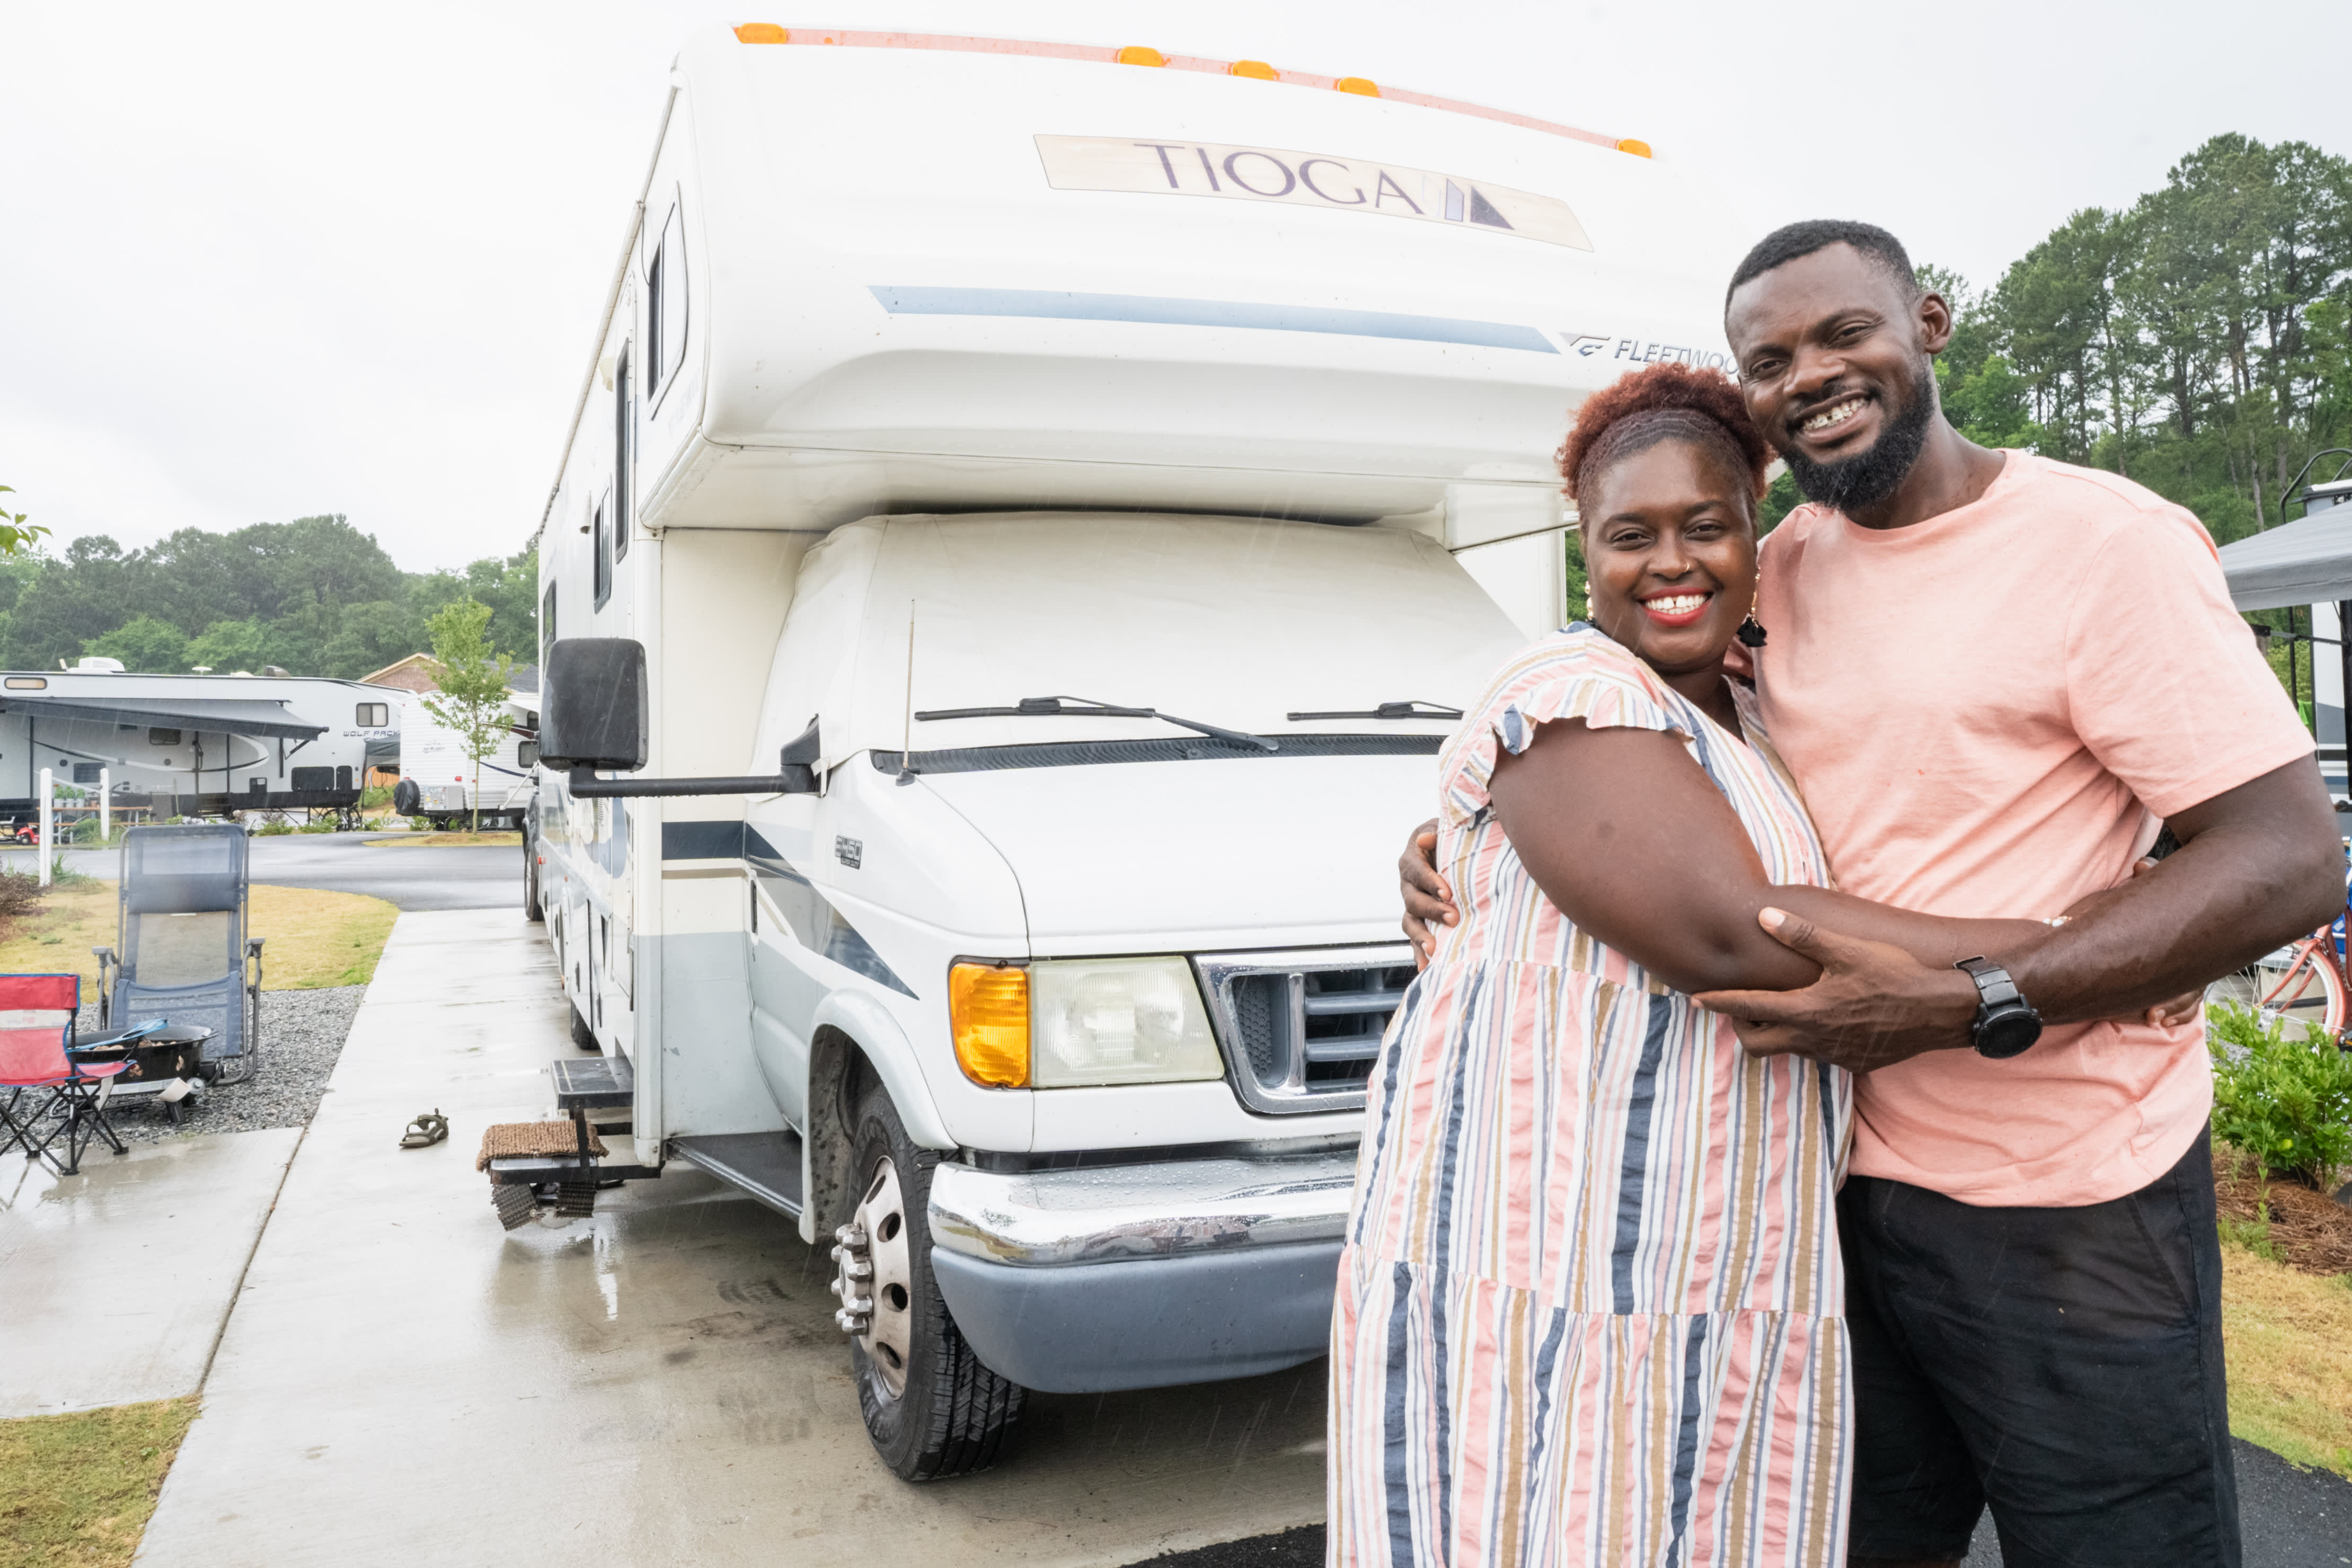 This family sold their house to live in an RV'now they earn over $80,000 a year traveling across the US